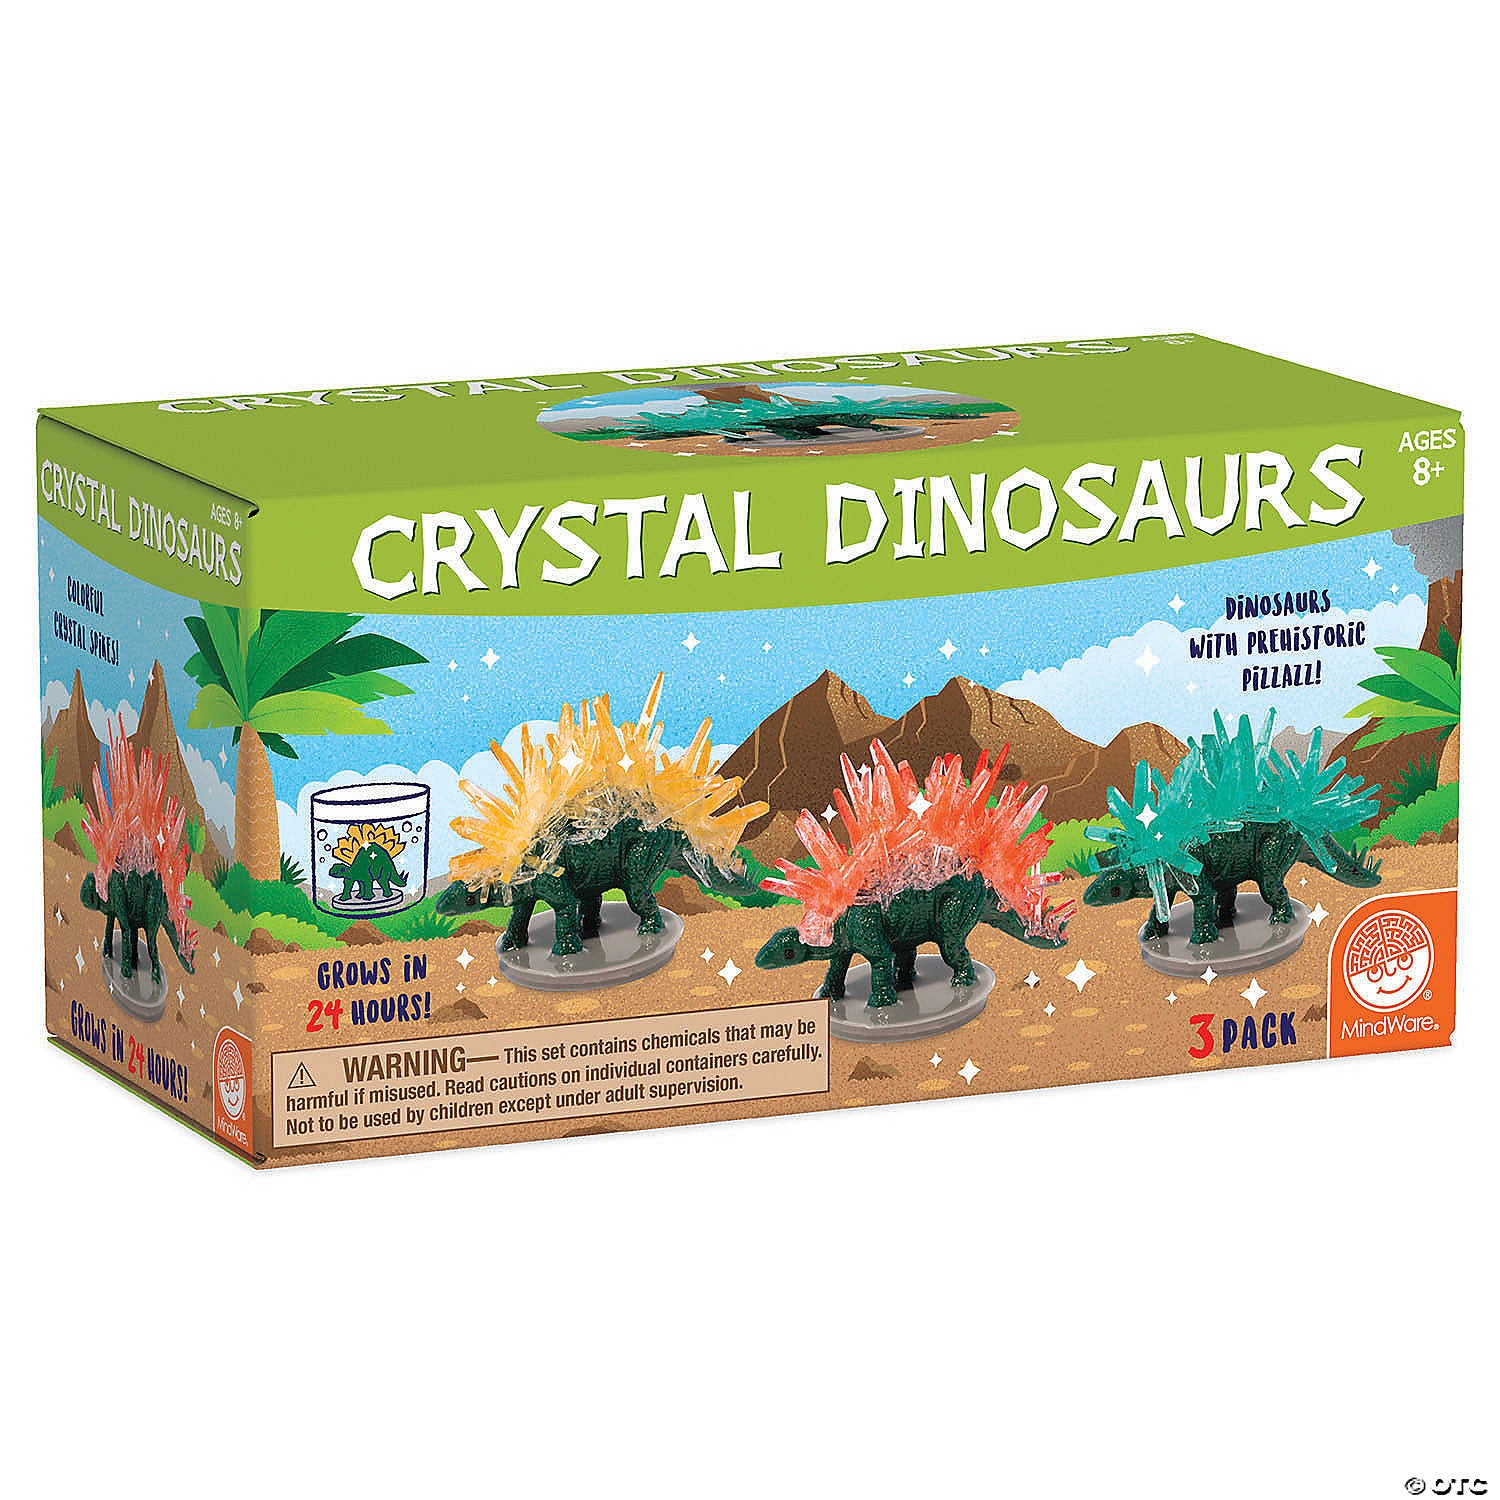 Dinosaurs Sparkle Formations